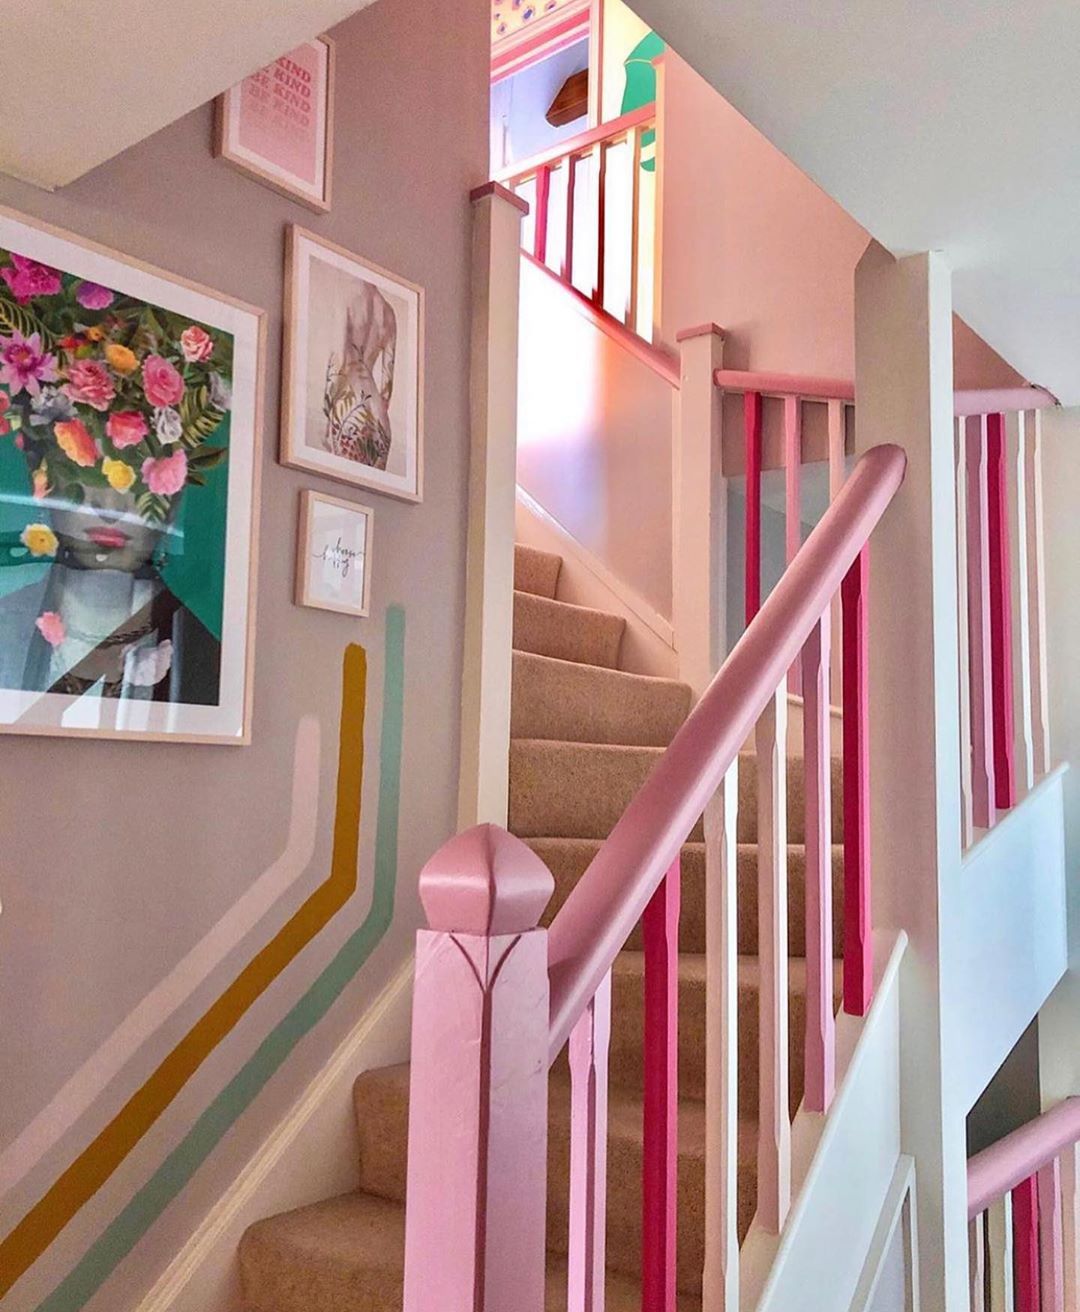 Top 10 Mistakes To Avoid In Maximalist Home Design